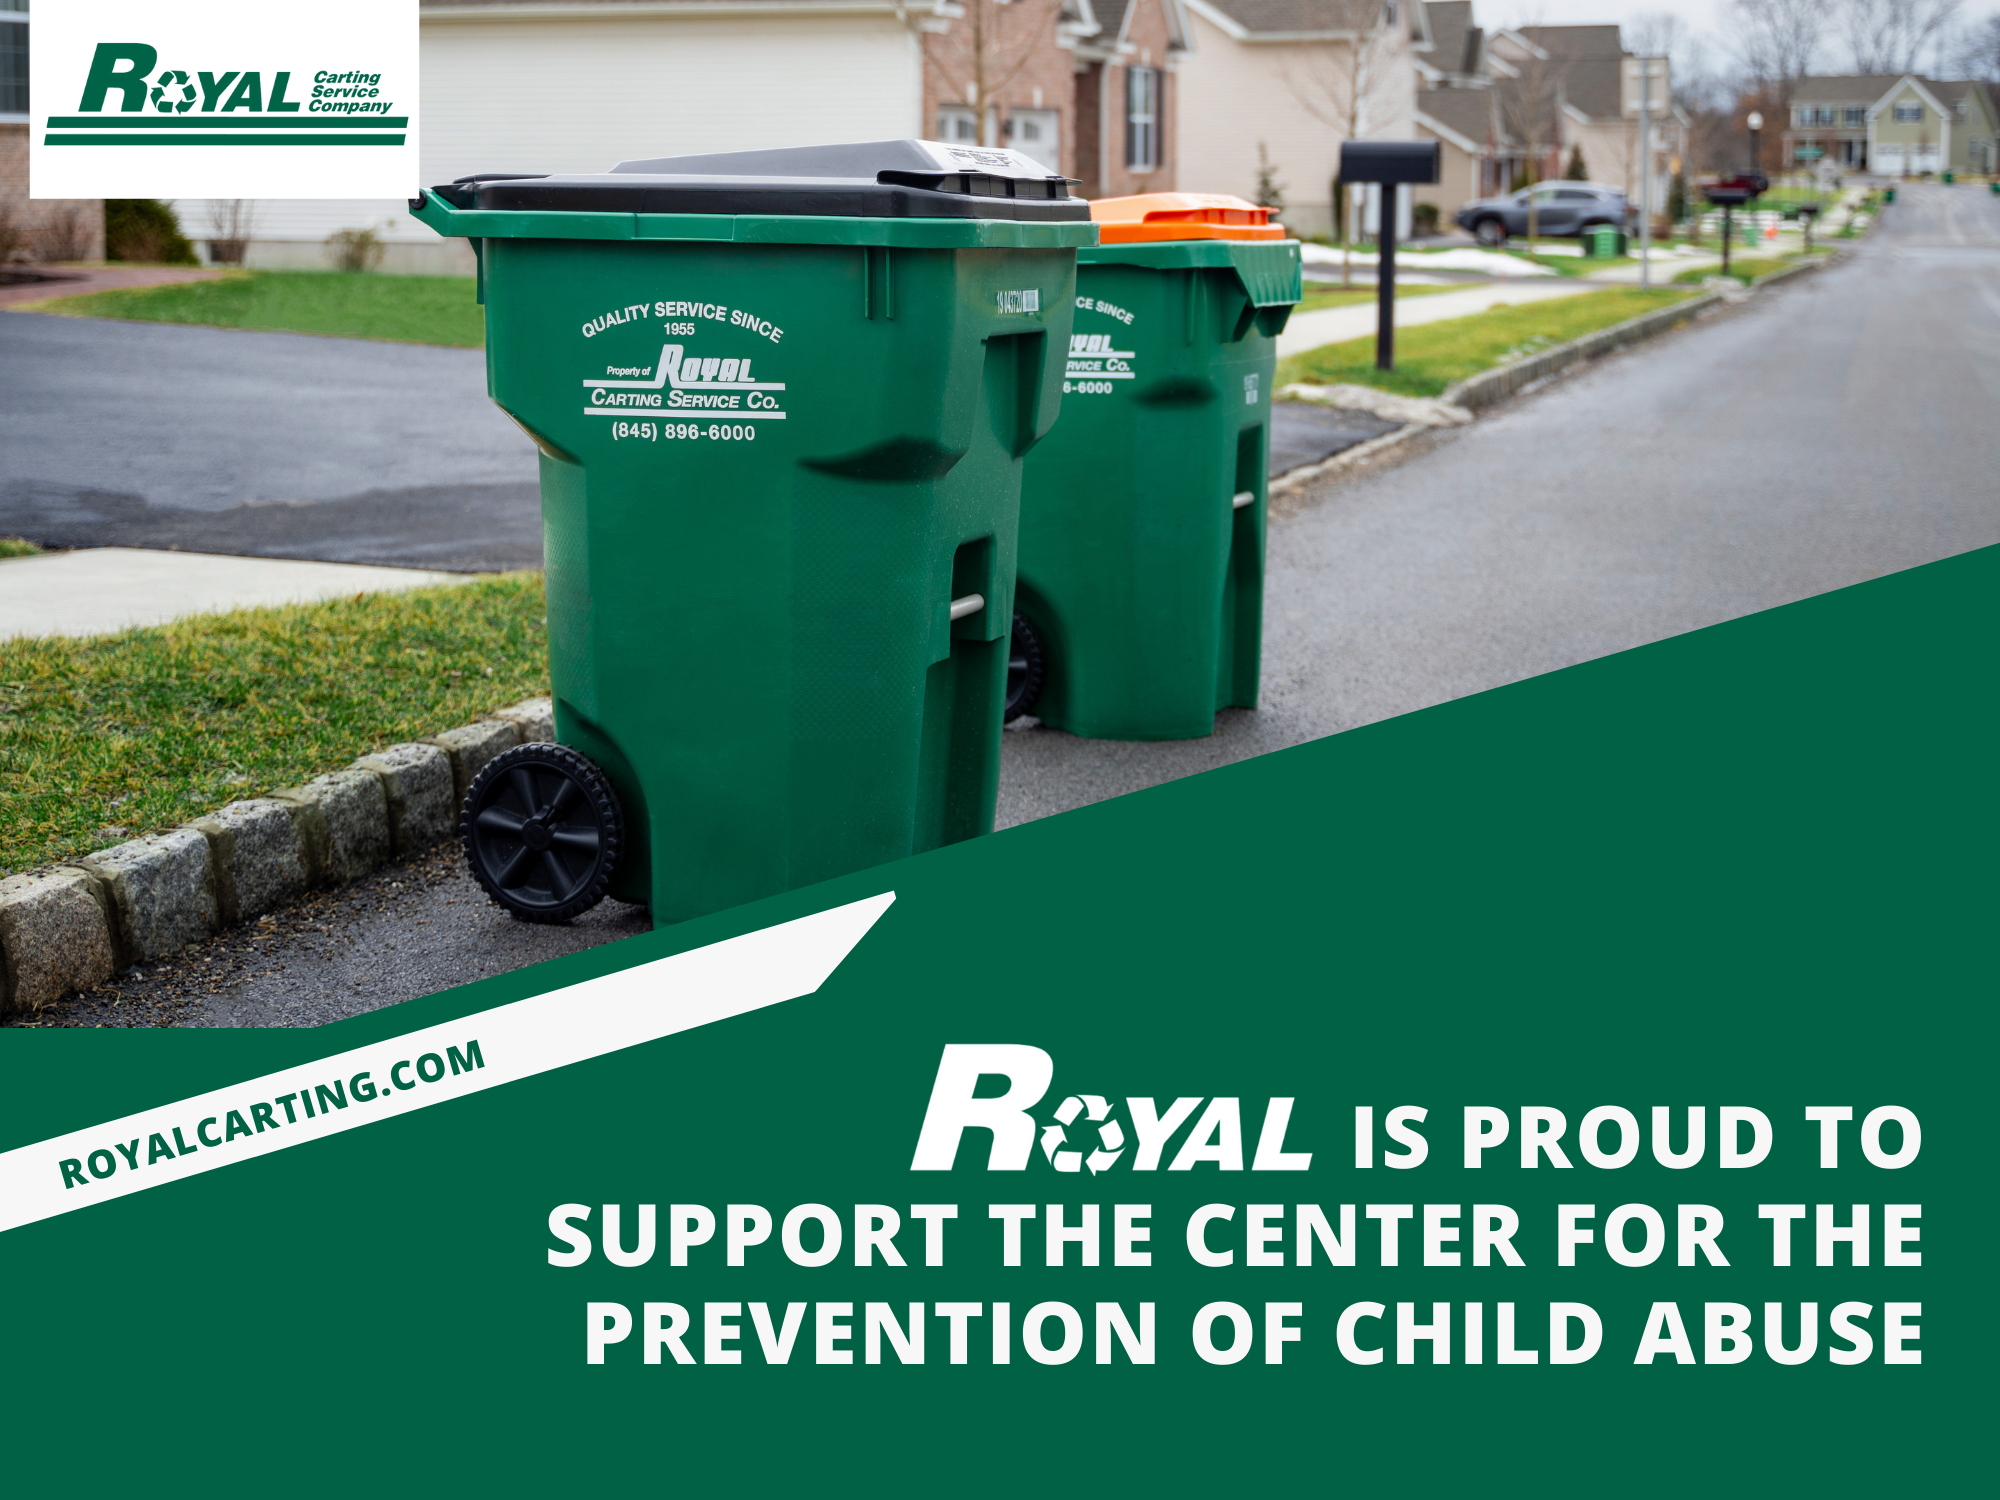 Royal Carting graphic announcing support for the center for the prevention of child abuse